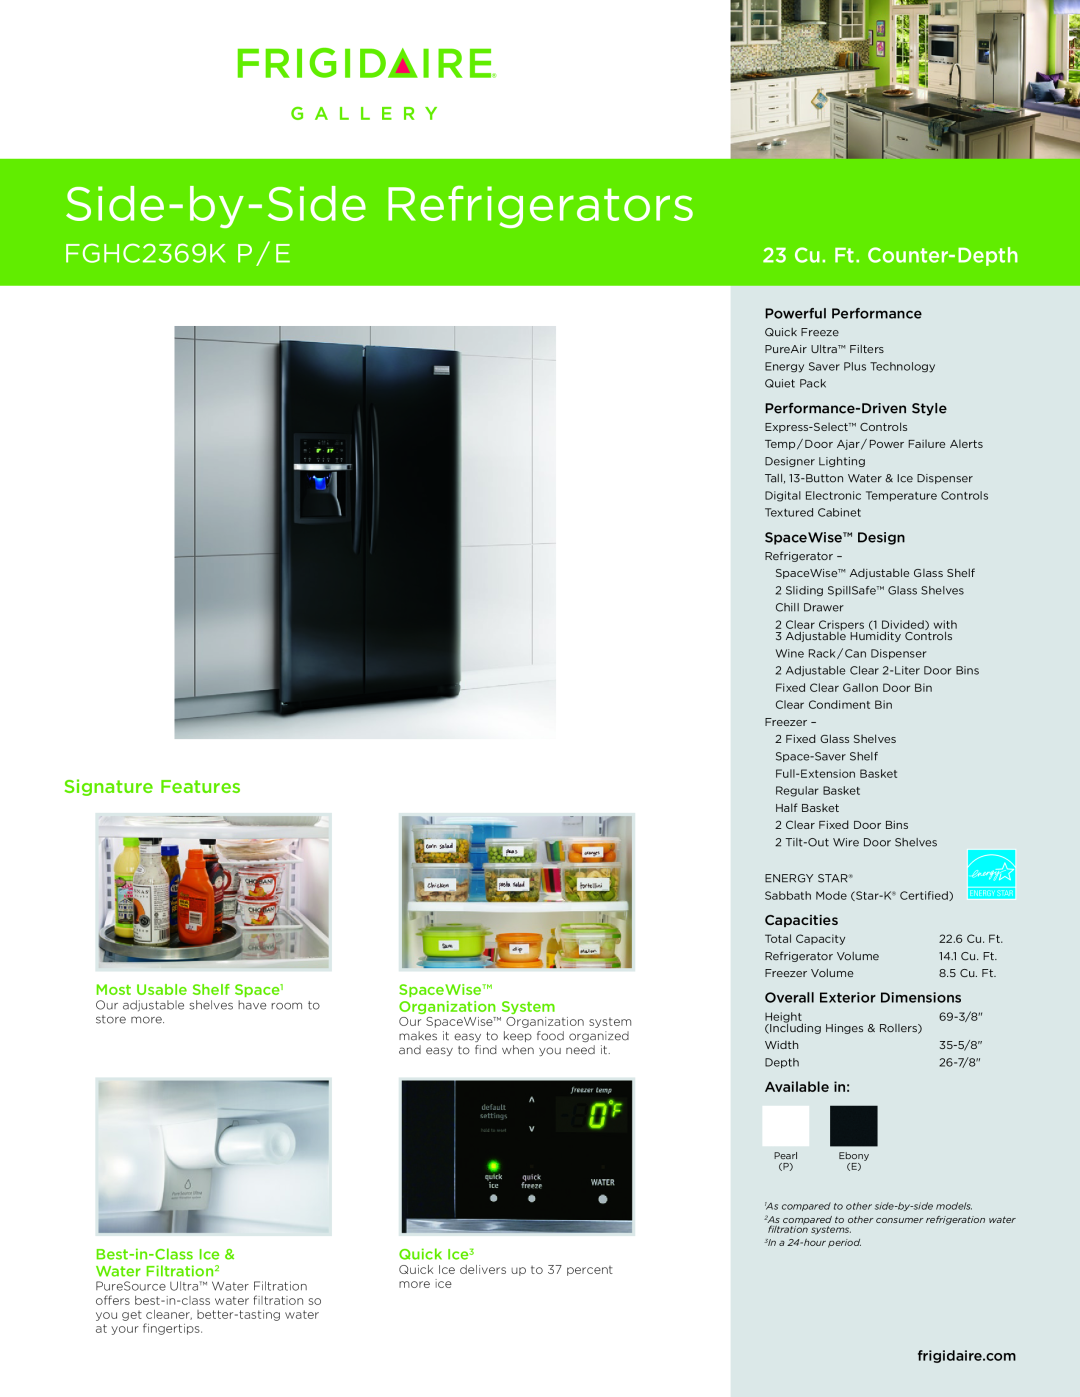 Frigidaire FGHC2369KP dimensions Most Usable Shelf Space1, SpaceWise, Organization System, Best-in-ClassIce, Quick Ice3 